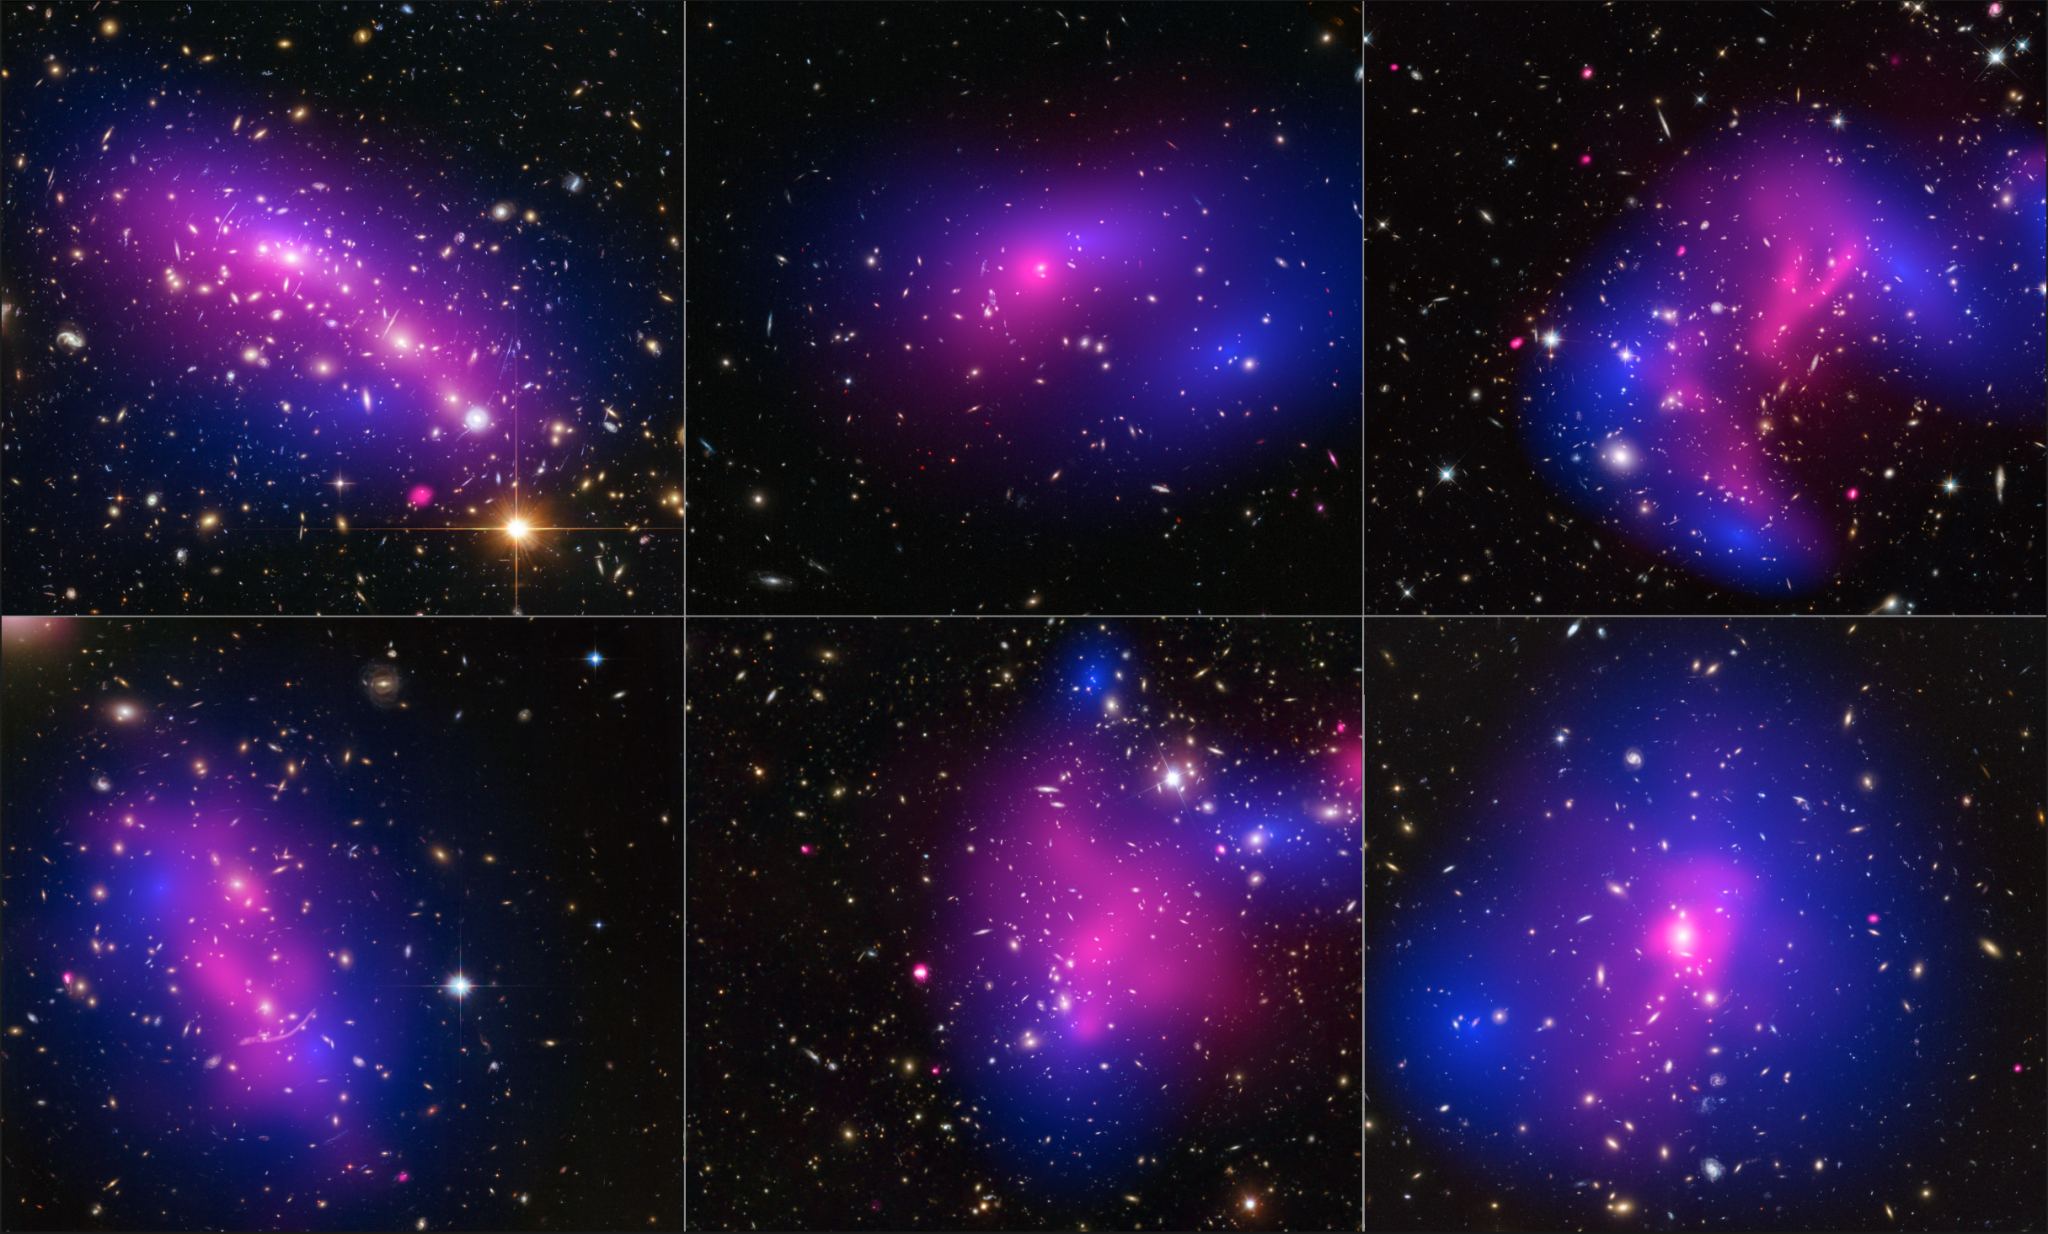 Images of galaxy clusters